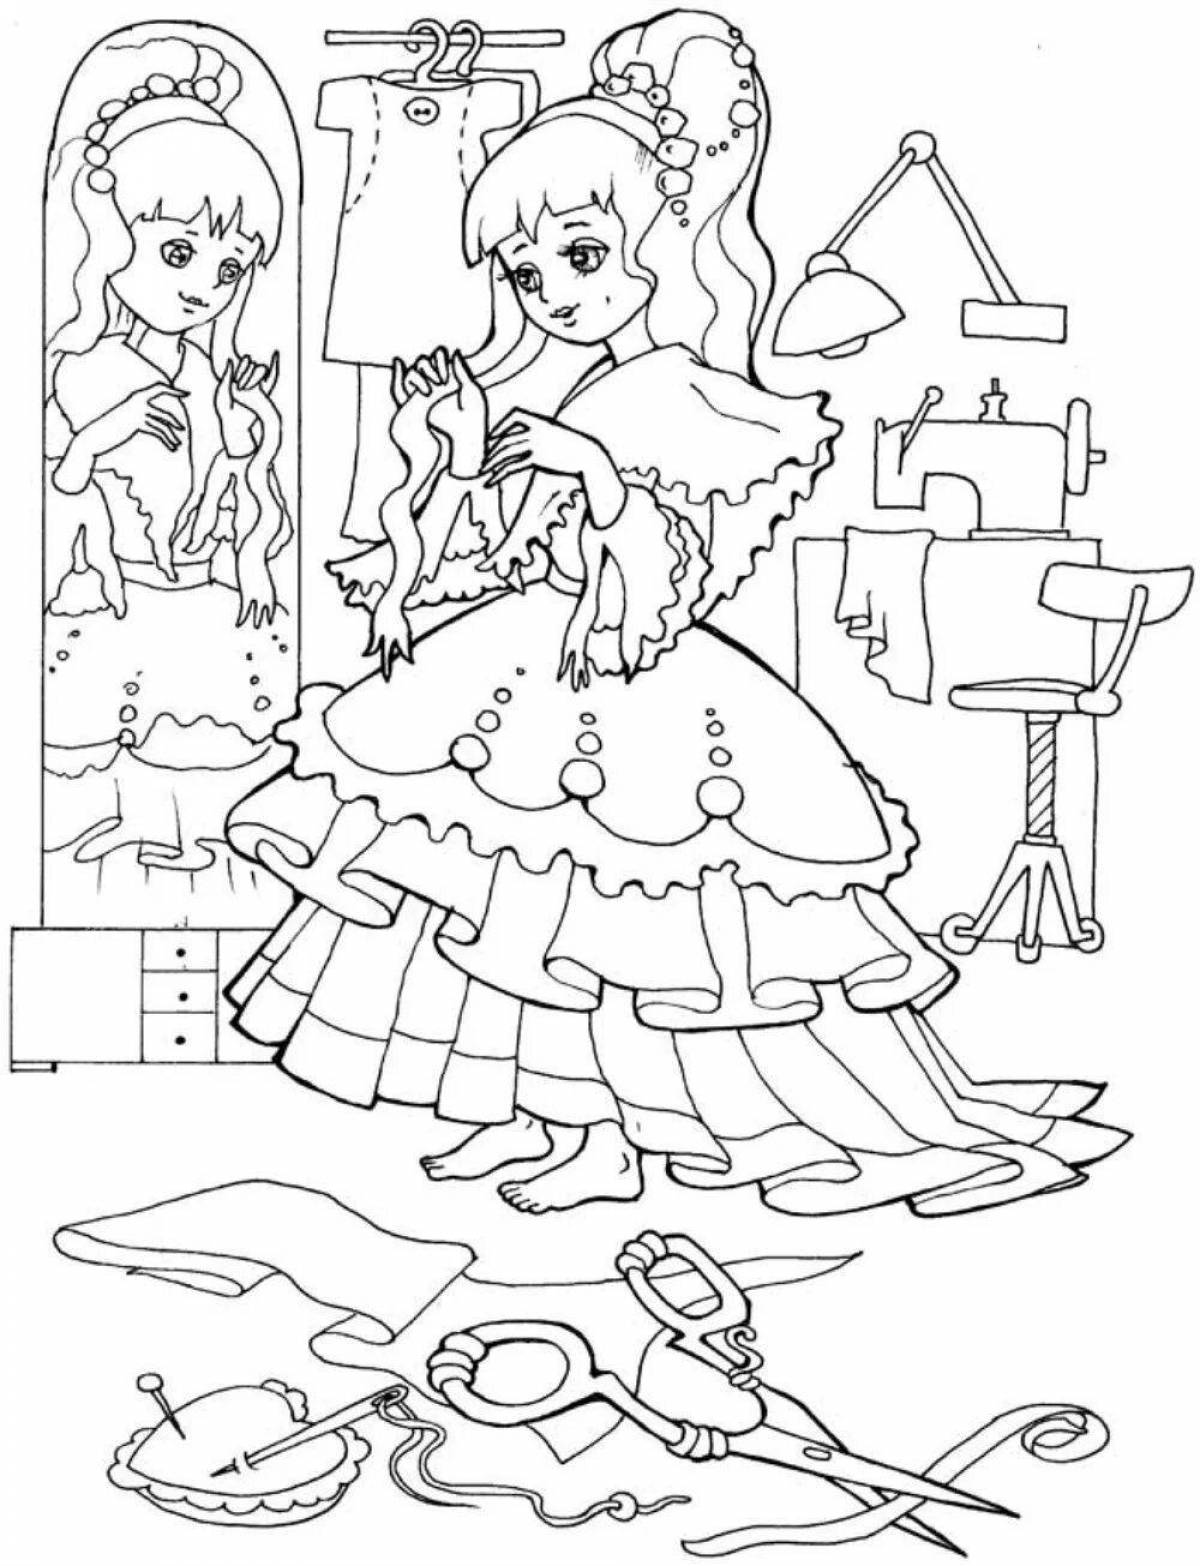 Crazy coloring book for 7 year old girls